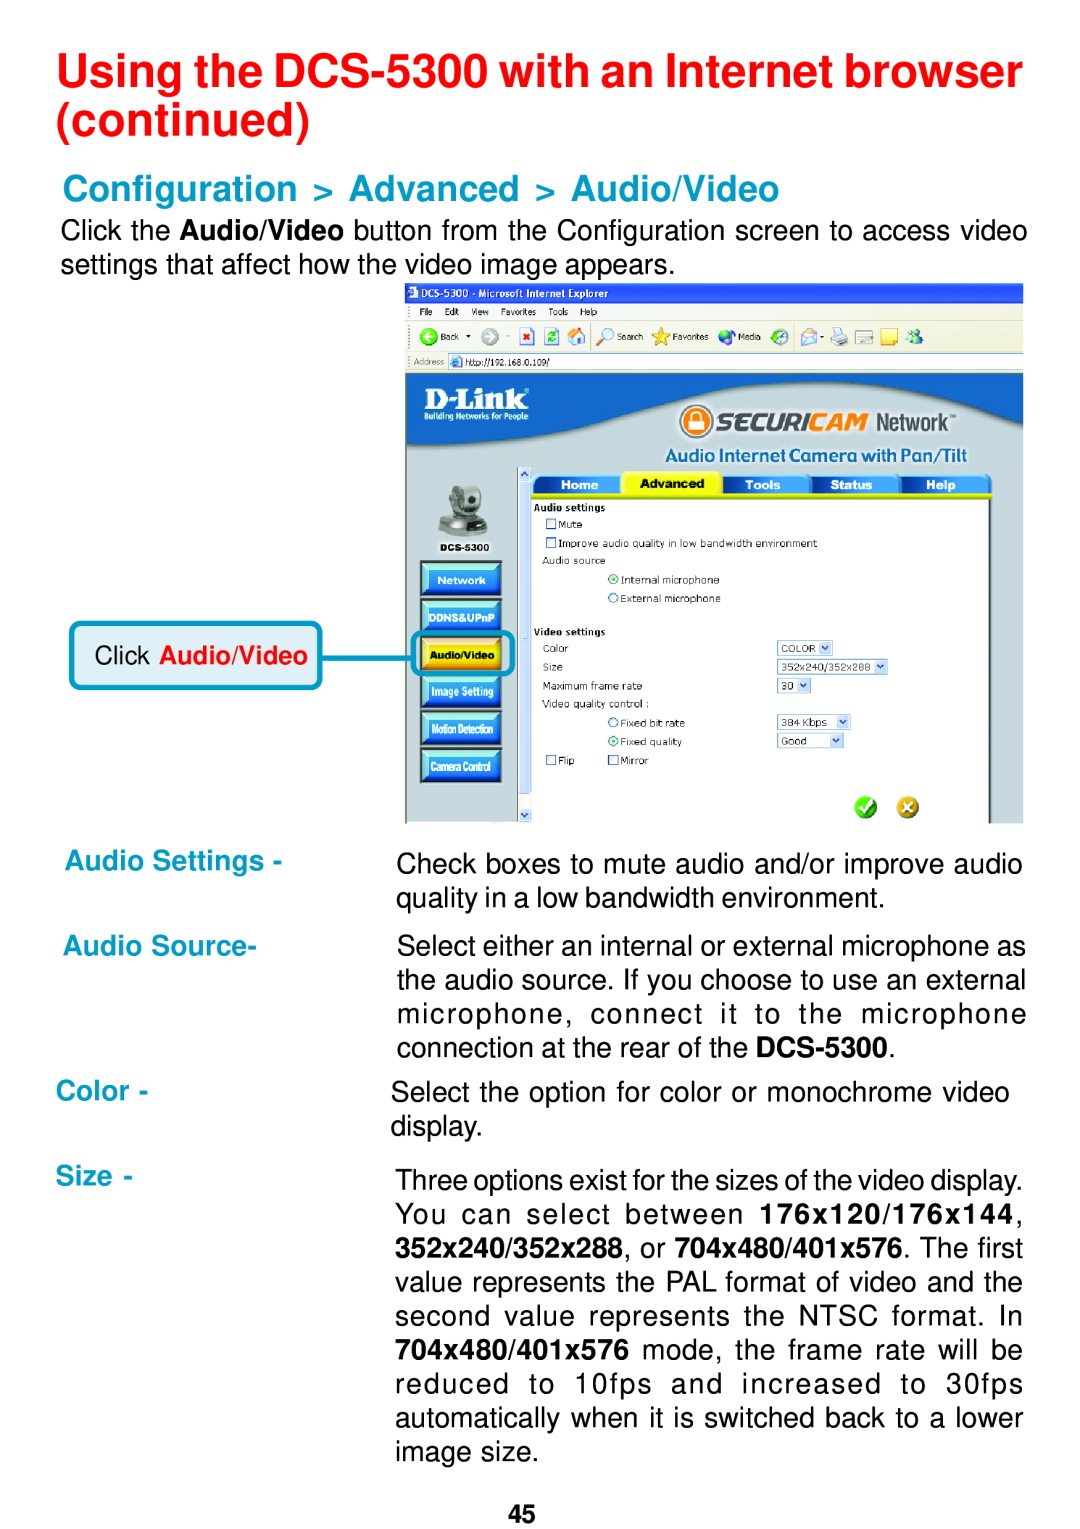 D-Link manual Configuration Advanced Audio/Video, Using the DCS-5300 with an Internet browser continued 